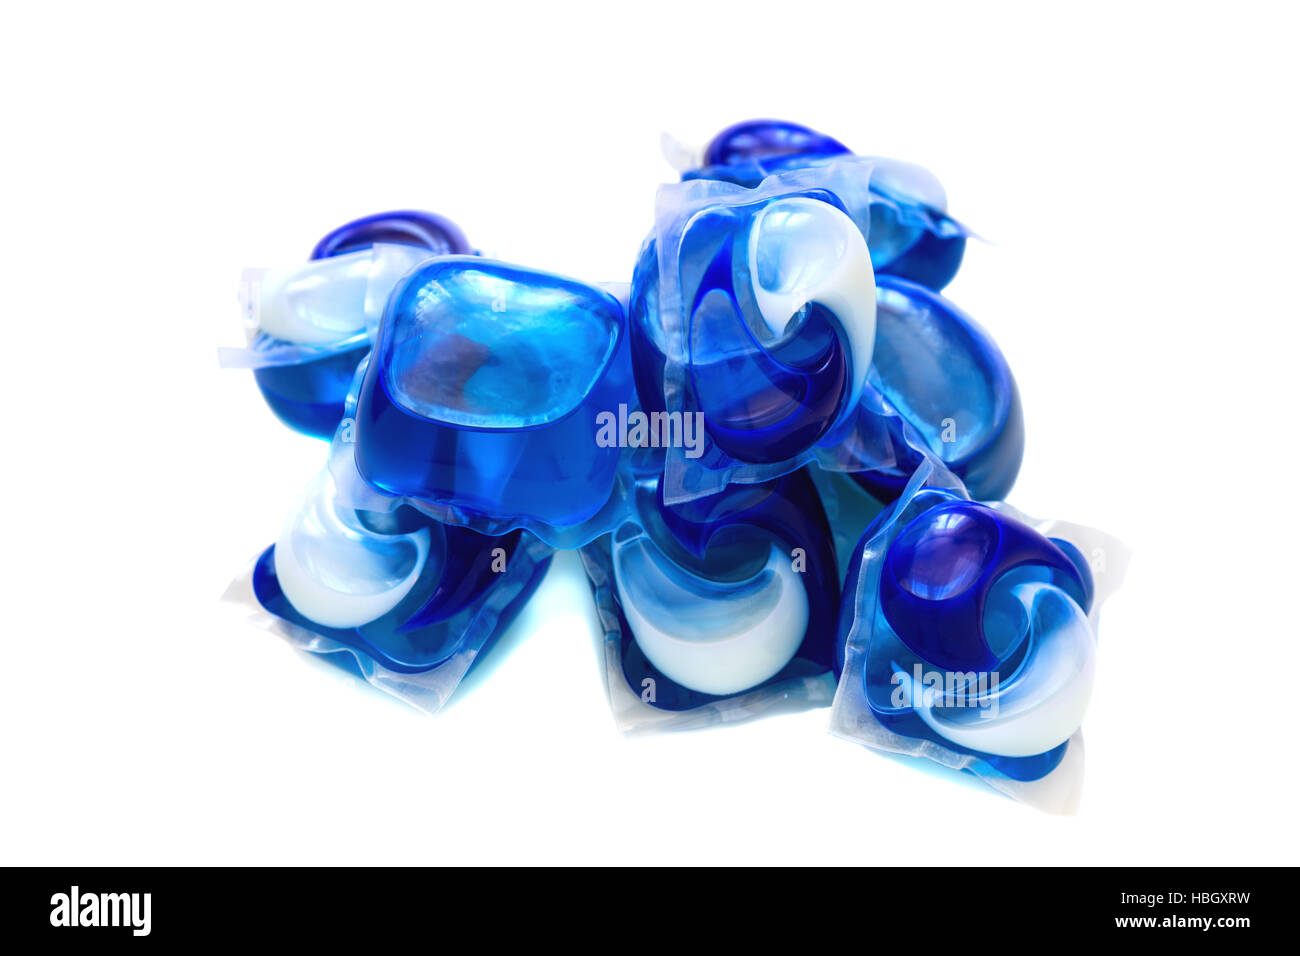 Capsules with laundry detergent. Stock Photo